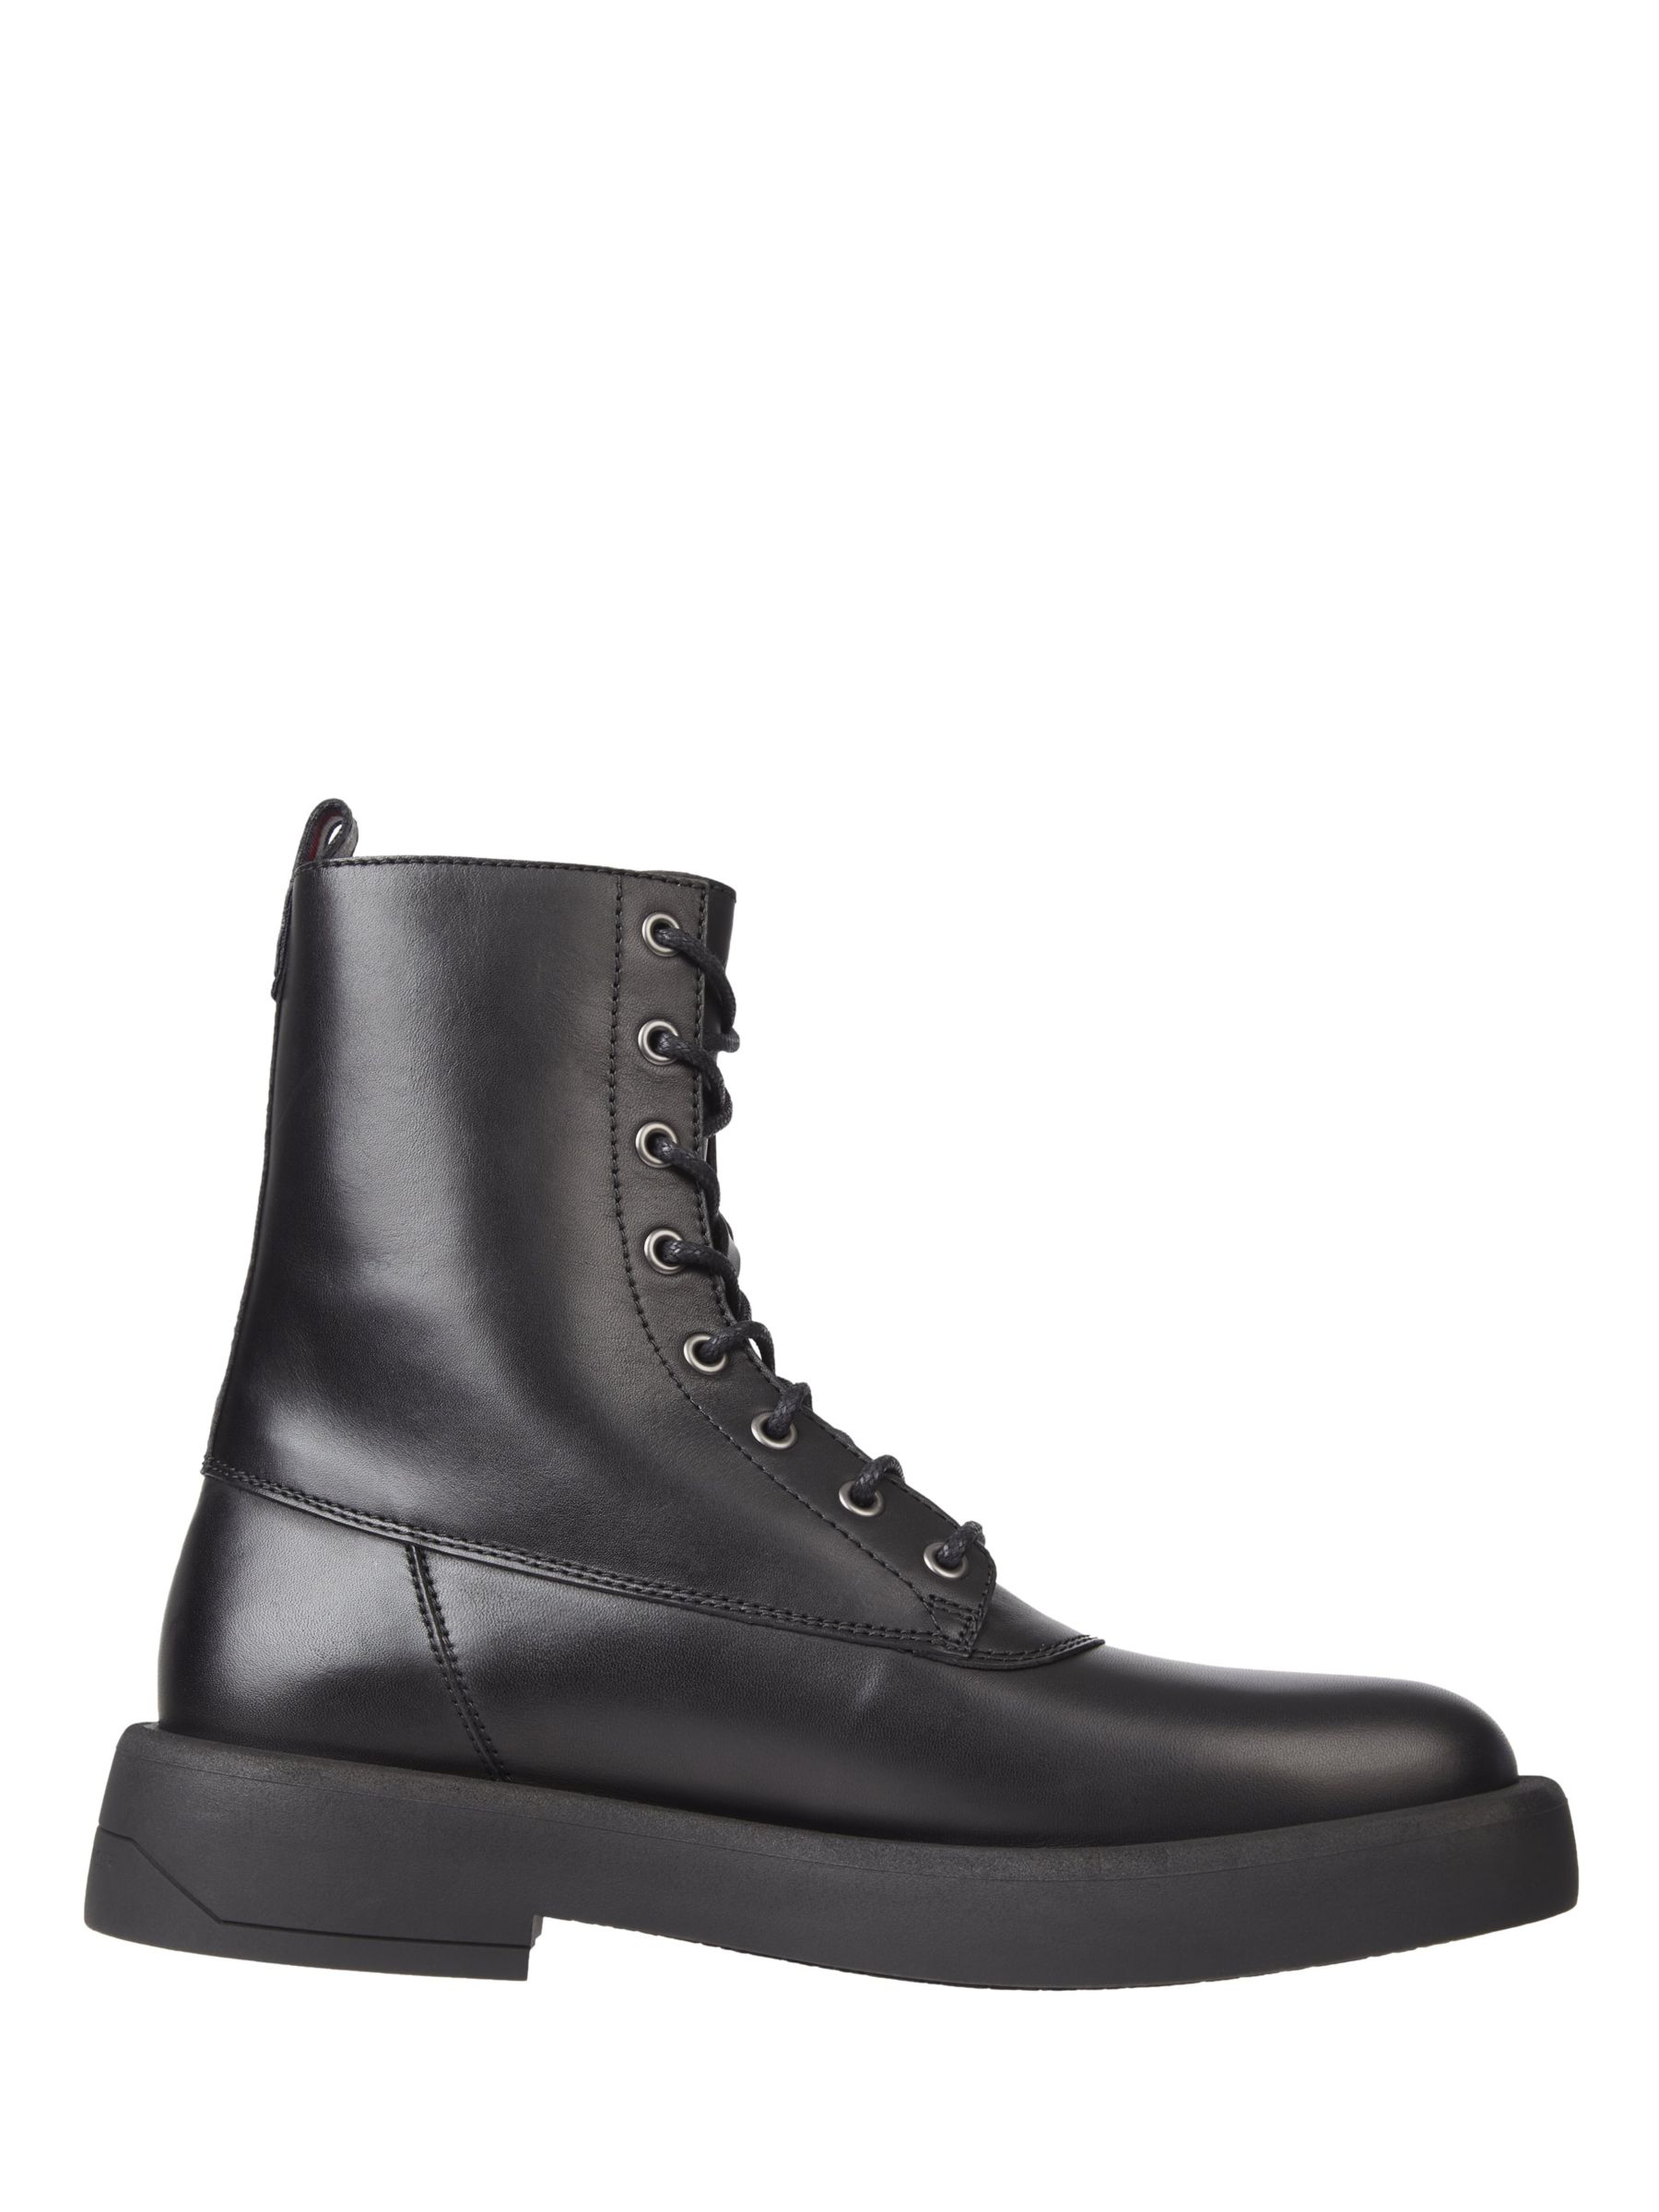 Tommy Hilfiger Leather Lace Up Boots, Black, 7